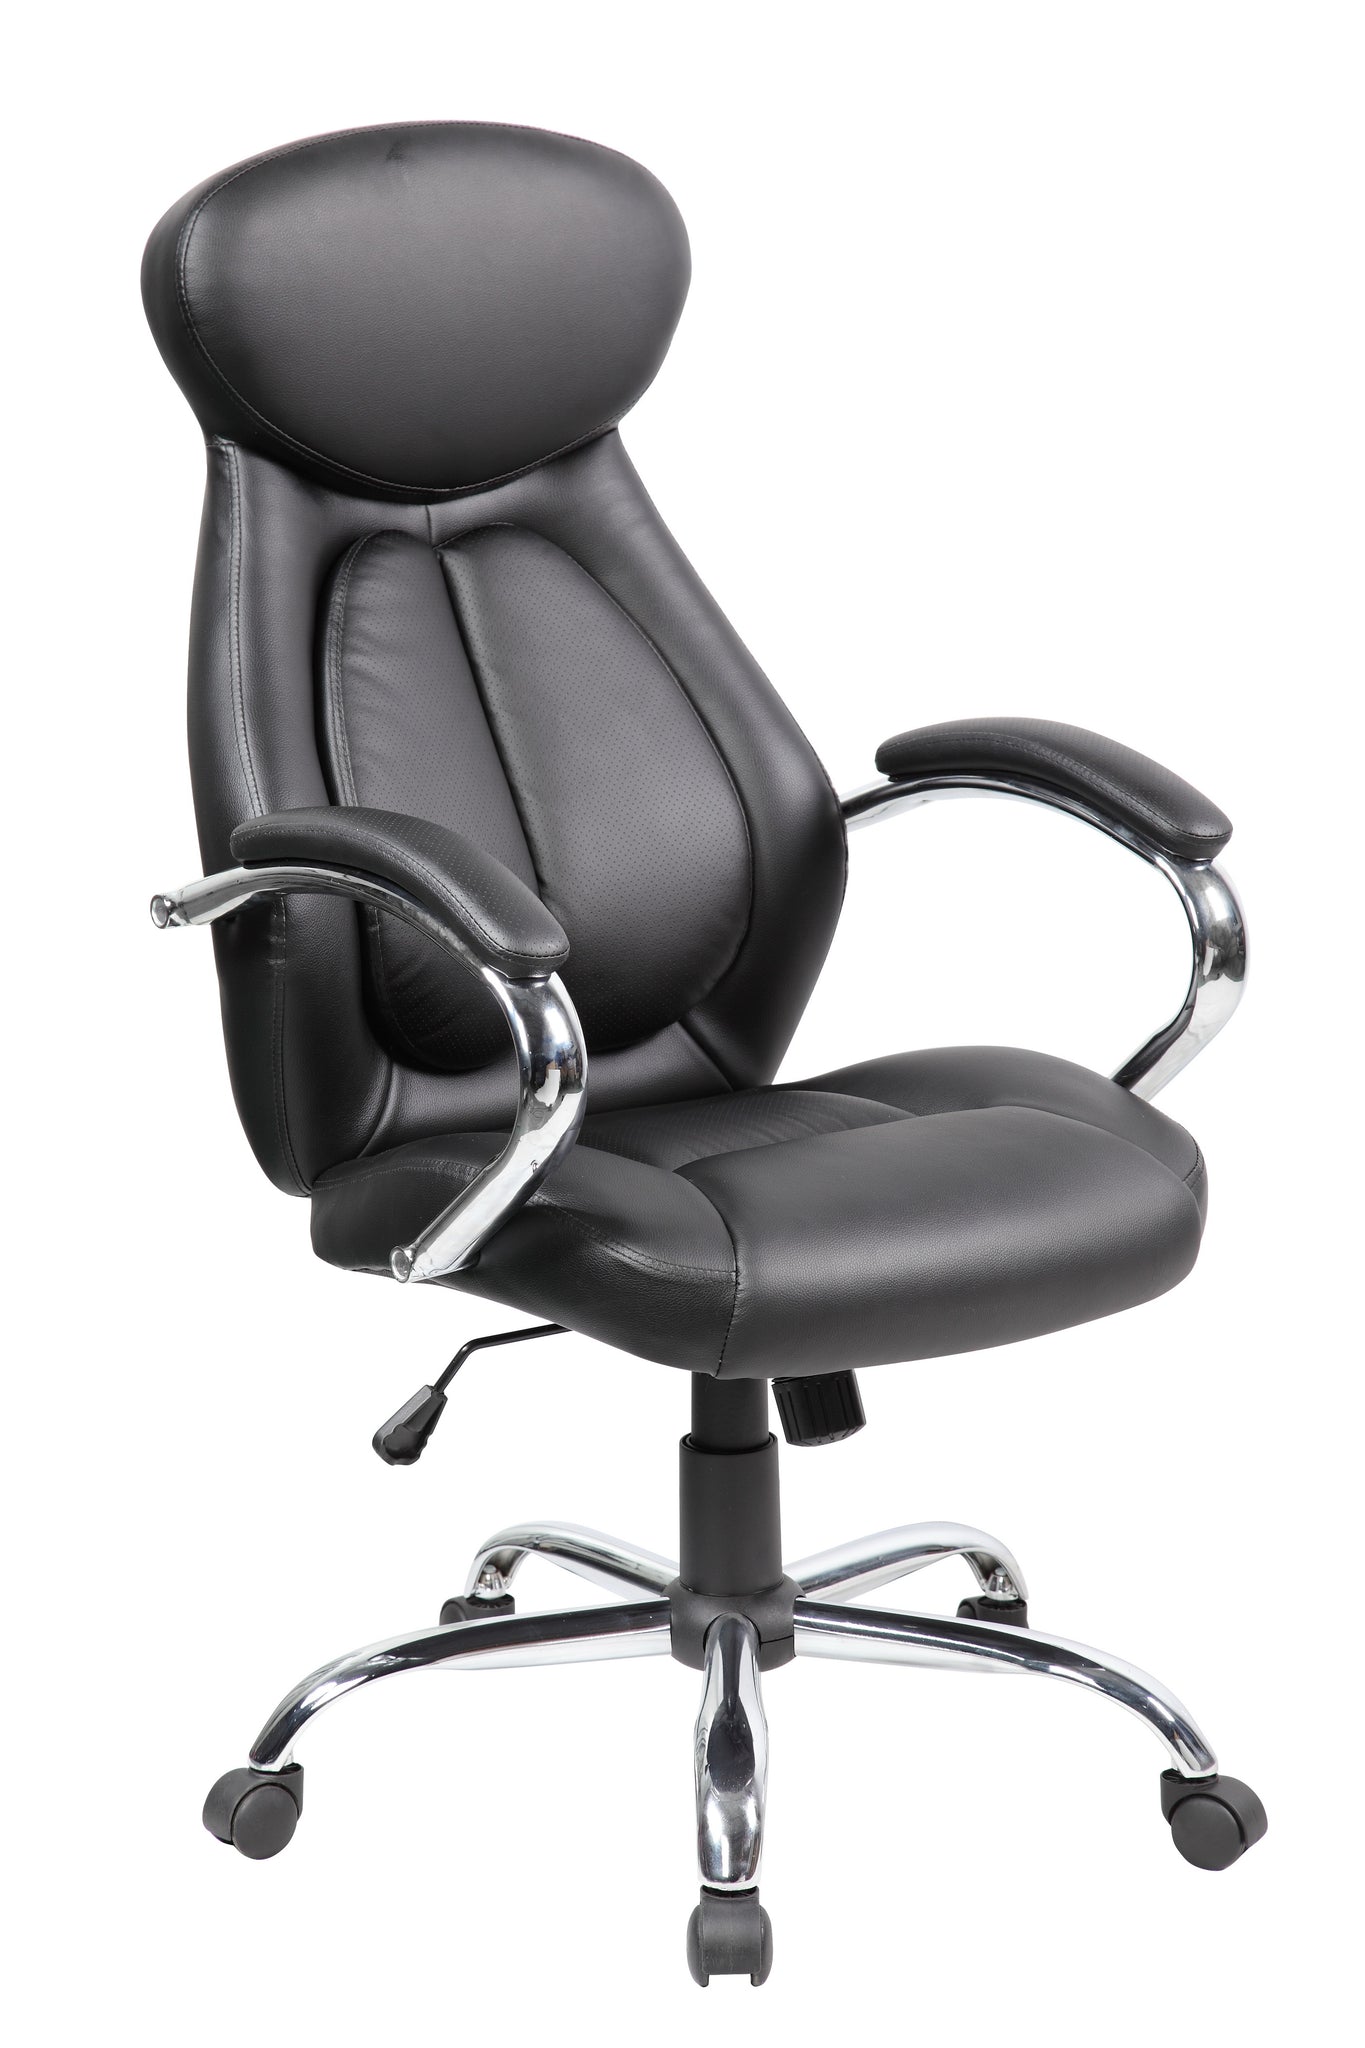 Racer Back Office Home Gaming Chair Comfortable Stylish Durable